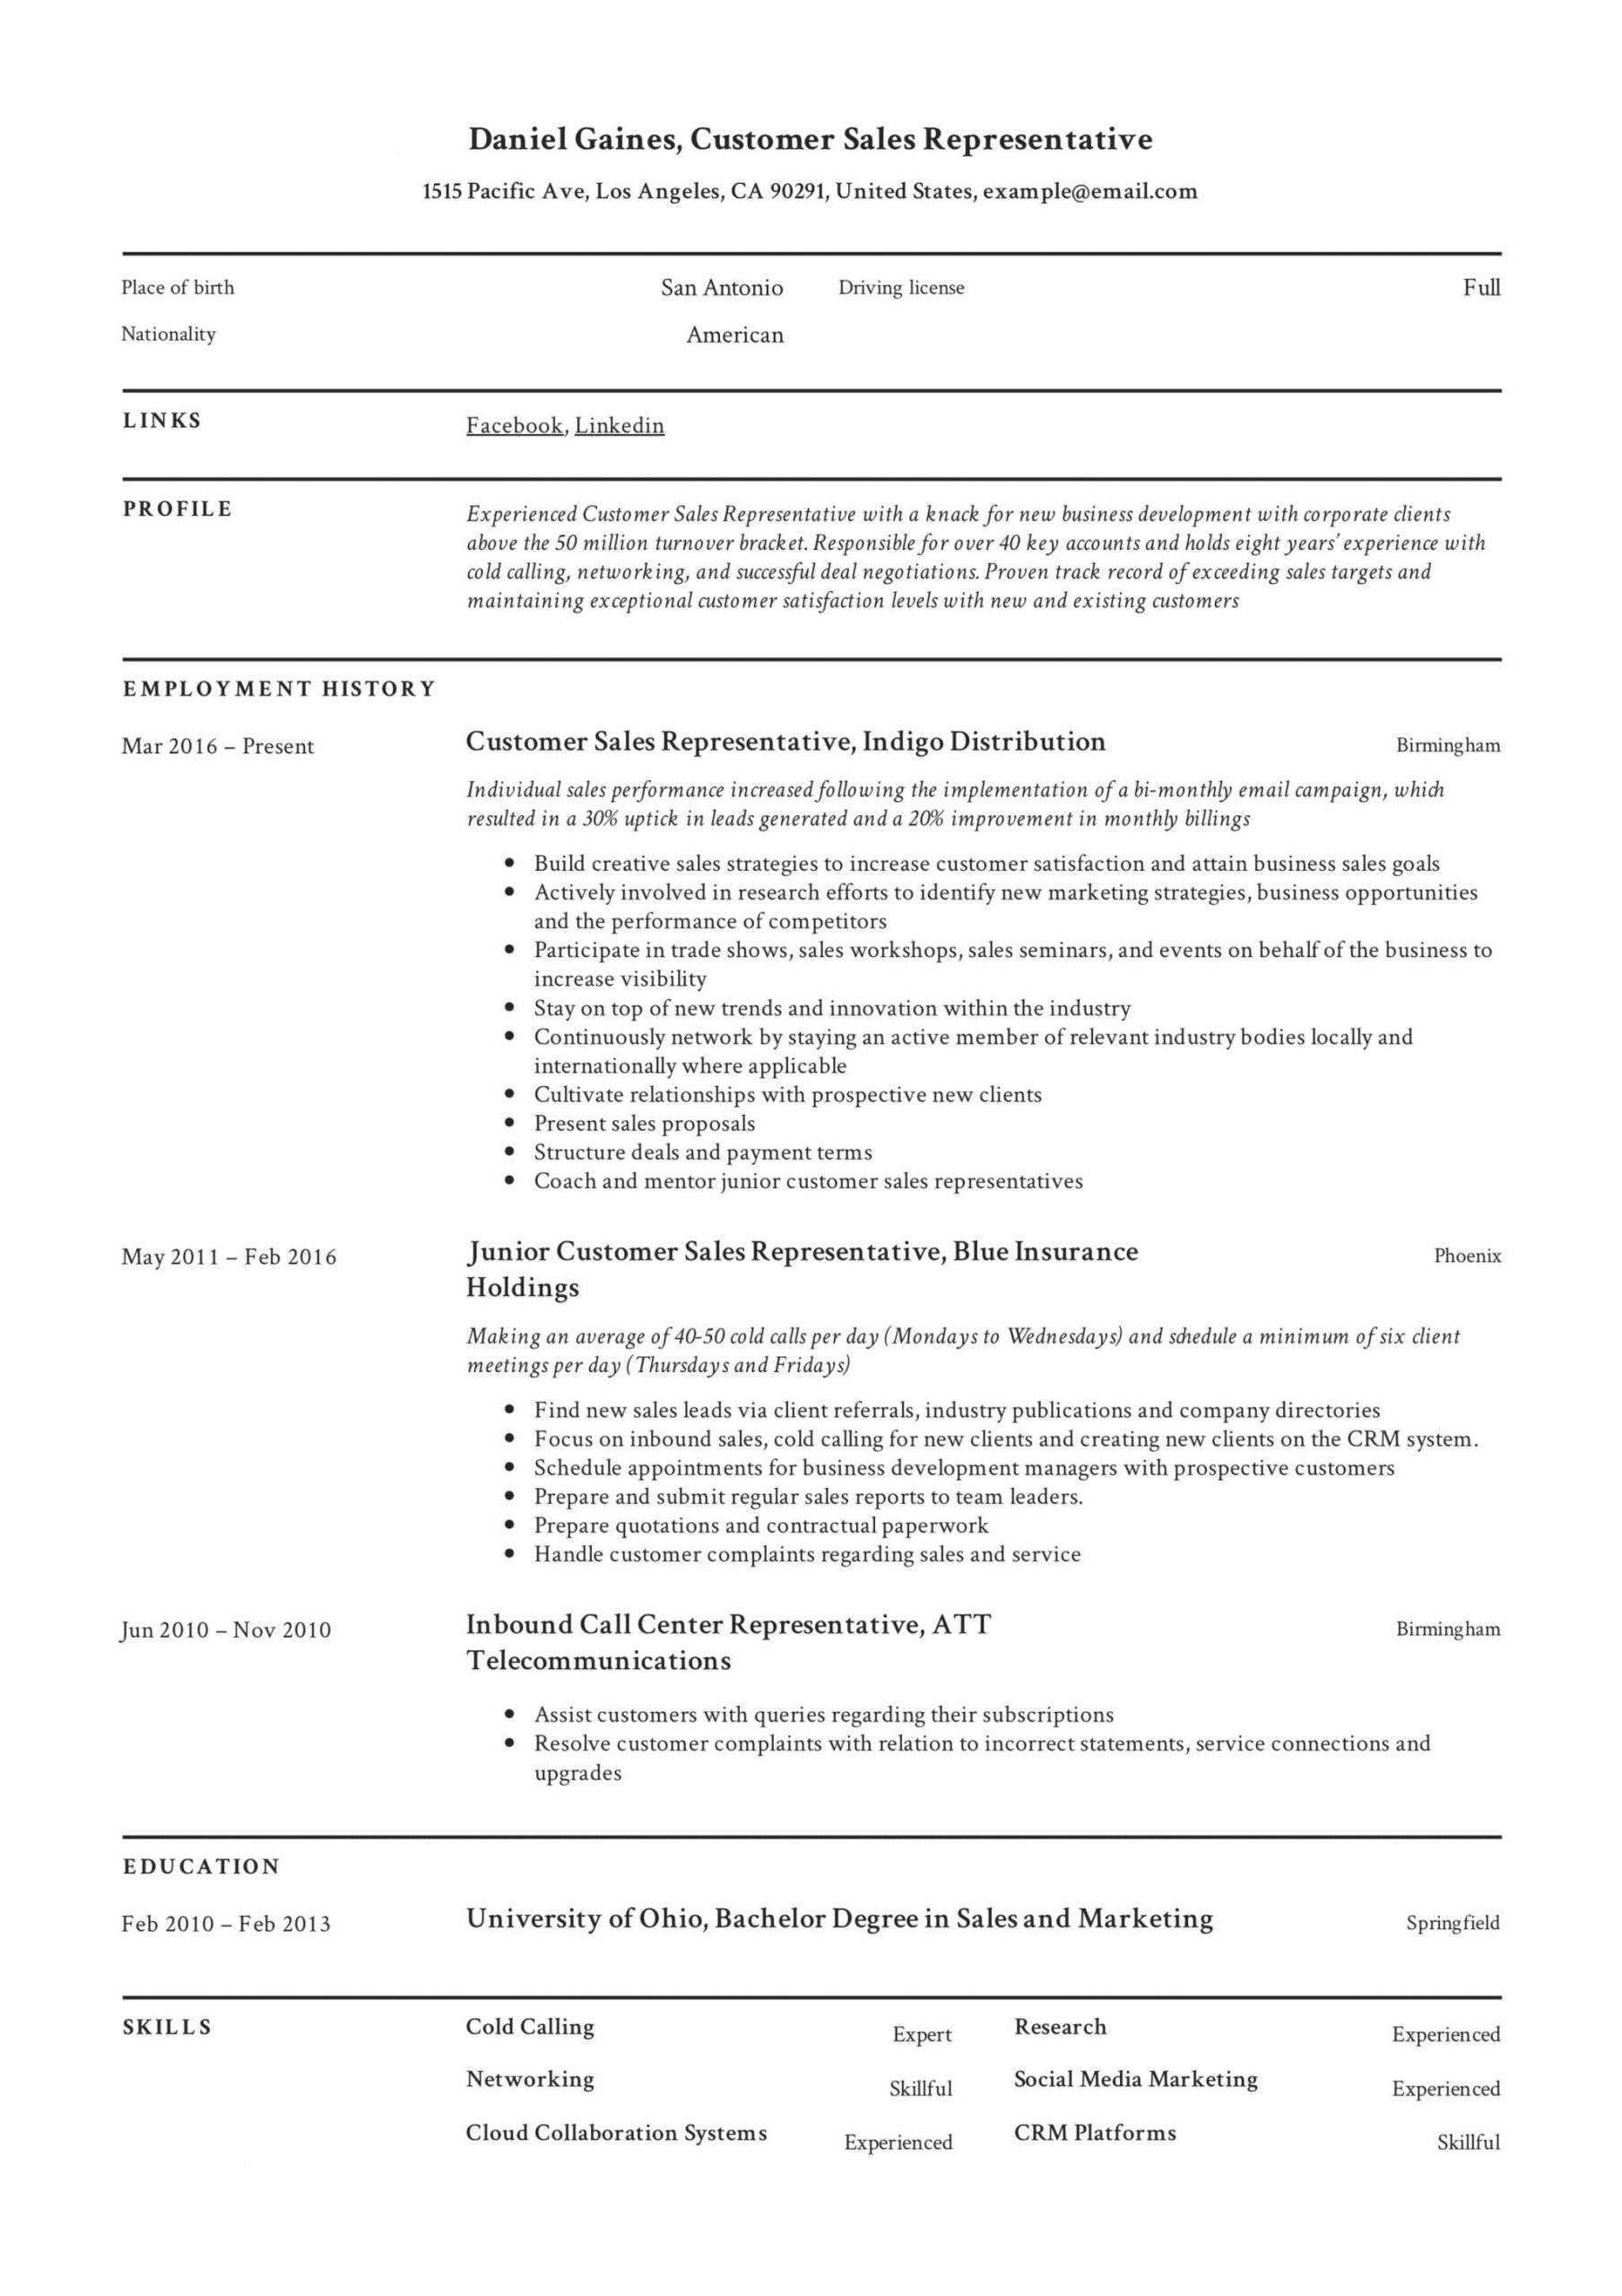 Resume Sample for Sales Lady without Experience Resume for Medical Representative without Experience. Eye-grabbing …